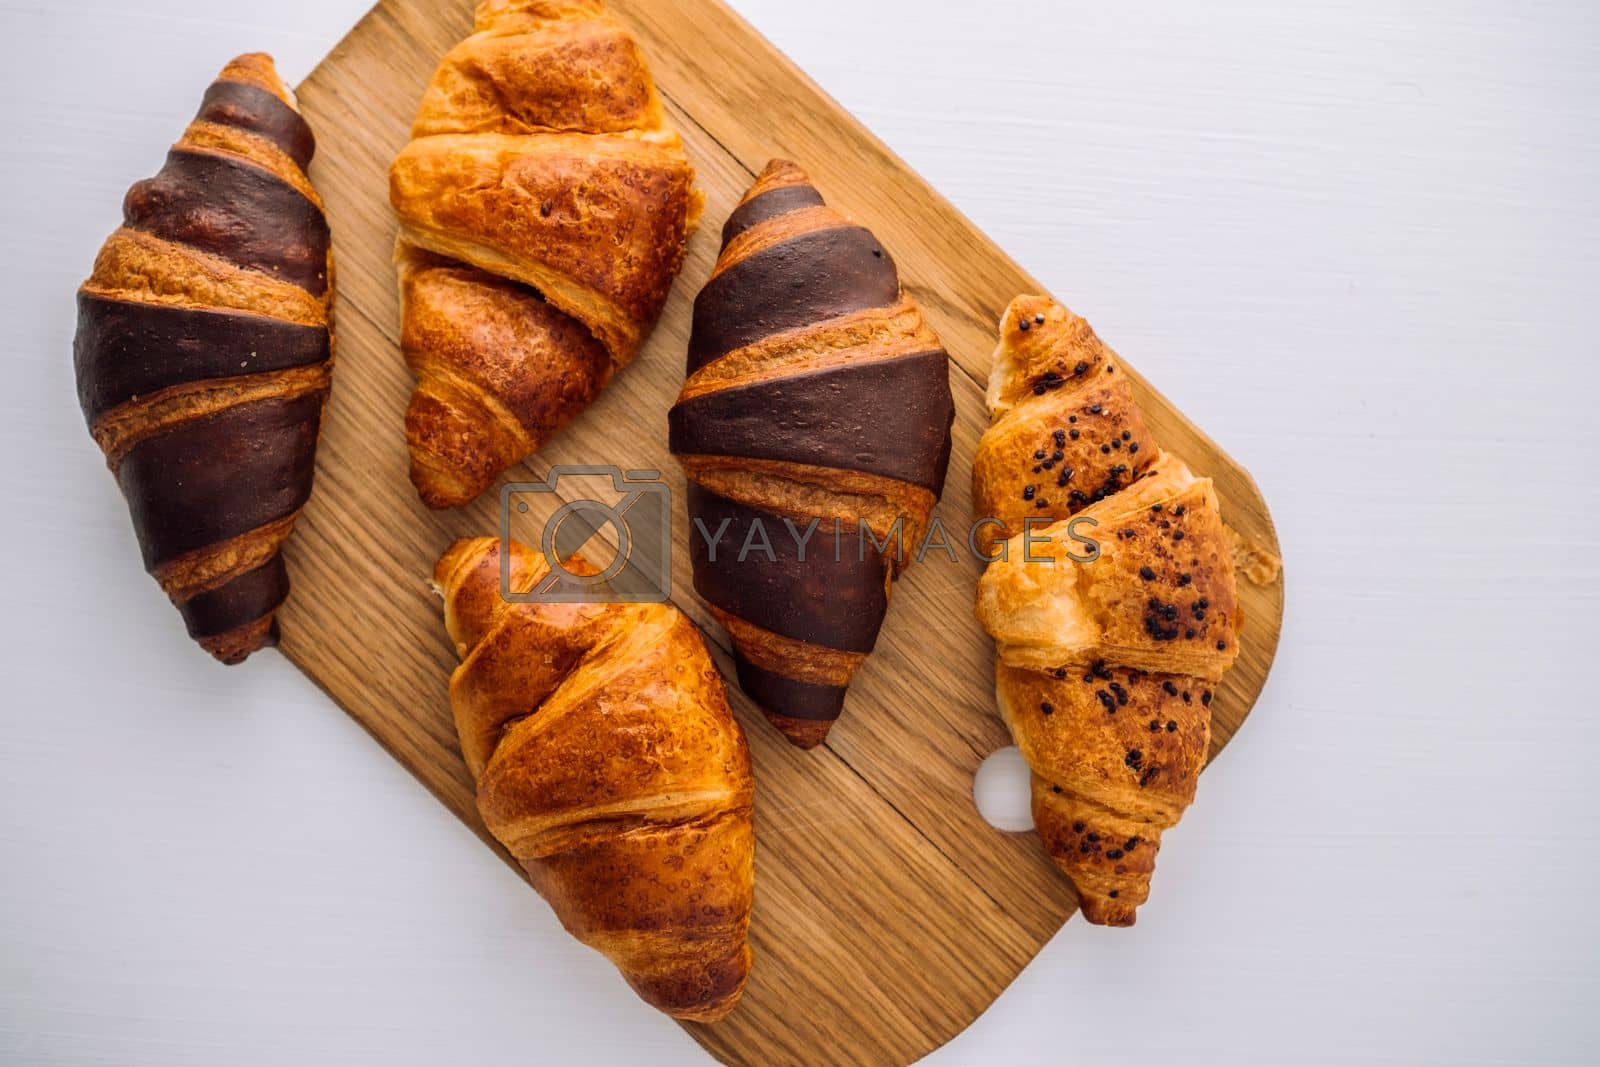 Royalty free image of Flat lay of bunch of appetizing brown and chocolate croissants on a wooden board on white table by Romvy